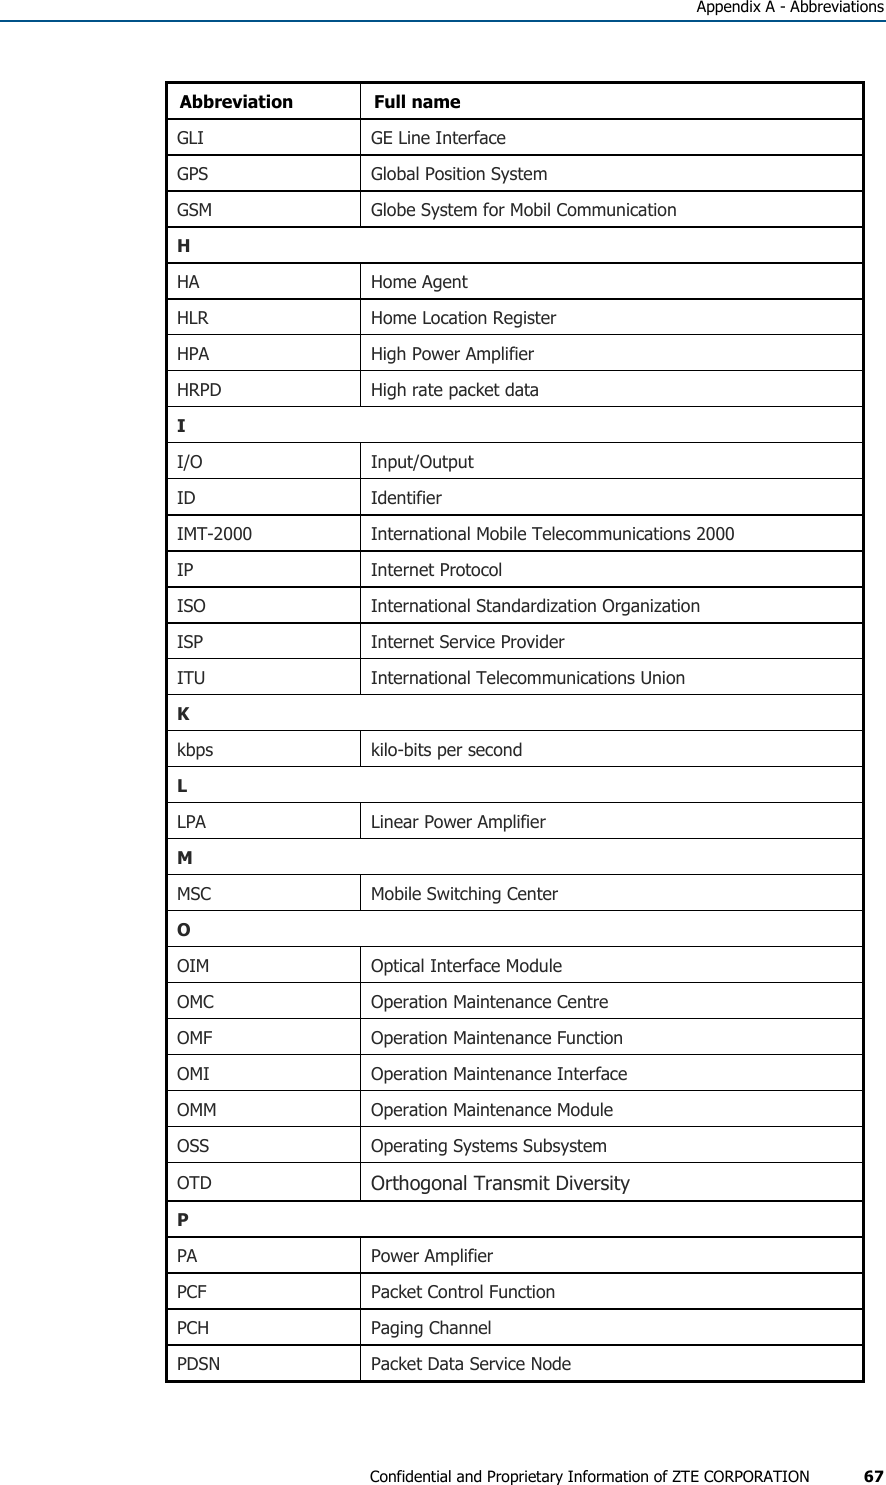   Appendix A - Abbreviations Confidential and Proprietary Information of ZTE CORPORATION 67 Abbreviation Full name GLI GE Line Interface GPS Global Position System GSM  Globe System for Mobil Communication H HA Home Agent HLR Home Location Register HPA  High Power Amplifier HRPD  High rate packet data I I/O Input/Output ID Identifier IMT-2000  International Mobile Telecommunications 2000 IP Internet Protocol ISO International Standardization Organization ISP  Internet Service Provider ITU  International Telecommunications Union K kbps kilo-bits per second L LPA  Linear Power Amplifier M MSC  Mobile Switching Center O OIM Optical Interface Module OMC  Operation Maintenance Centre OMF Operation Maintenance Function OMI  Operation Maintenance Interface OMM  Operation Maintenance Module OSS  Operating Systems Subsystem OTD  Orthogonal Transmit Diversity P PA Power Amplifier PCF Packet Control Function PCH Paging Channel PDSN  Packet Data Service Node 